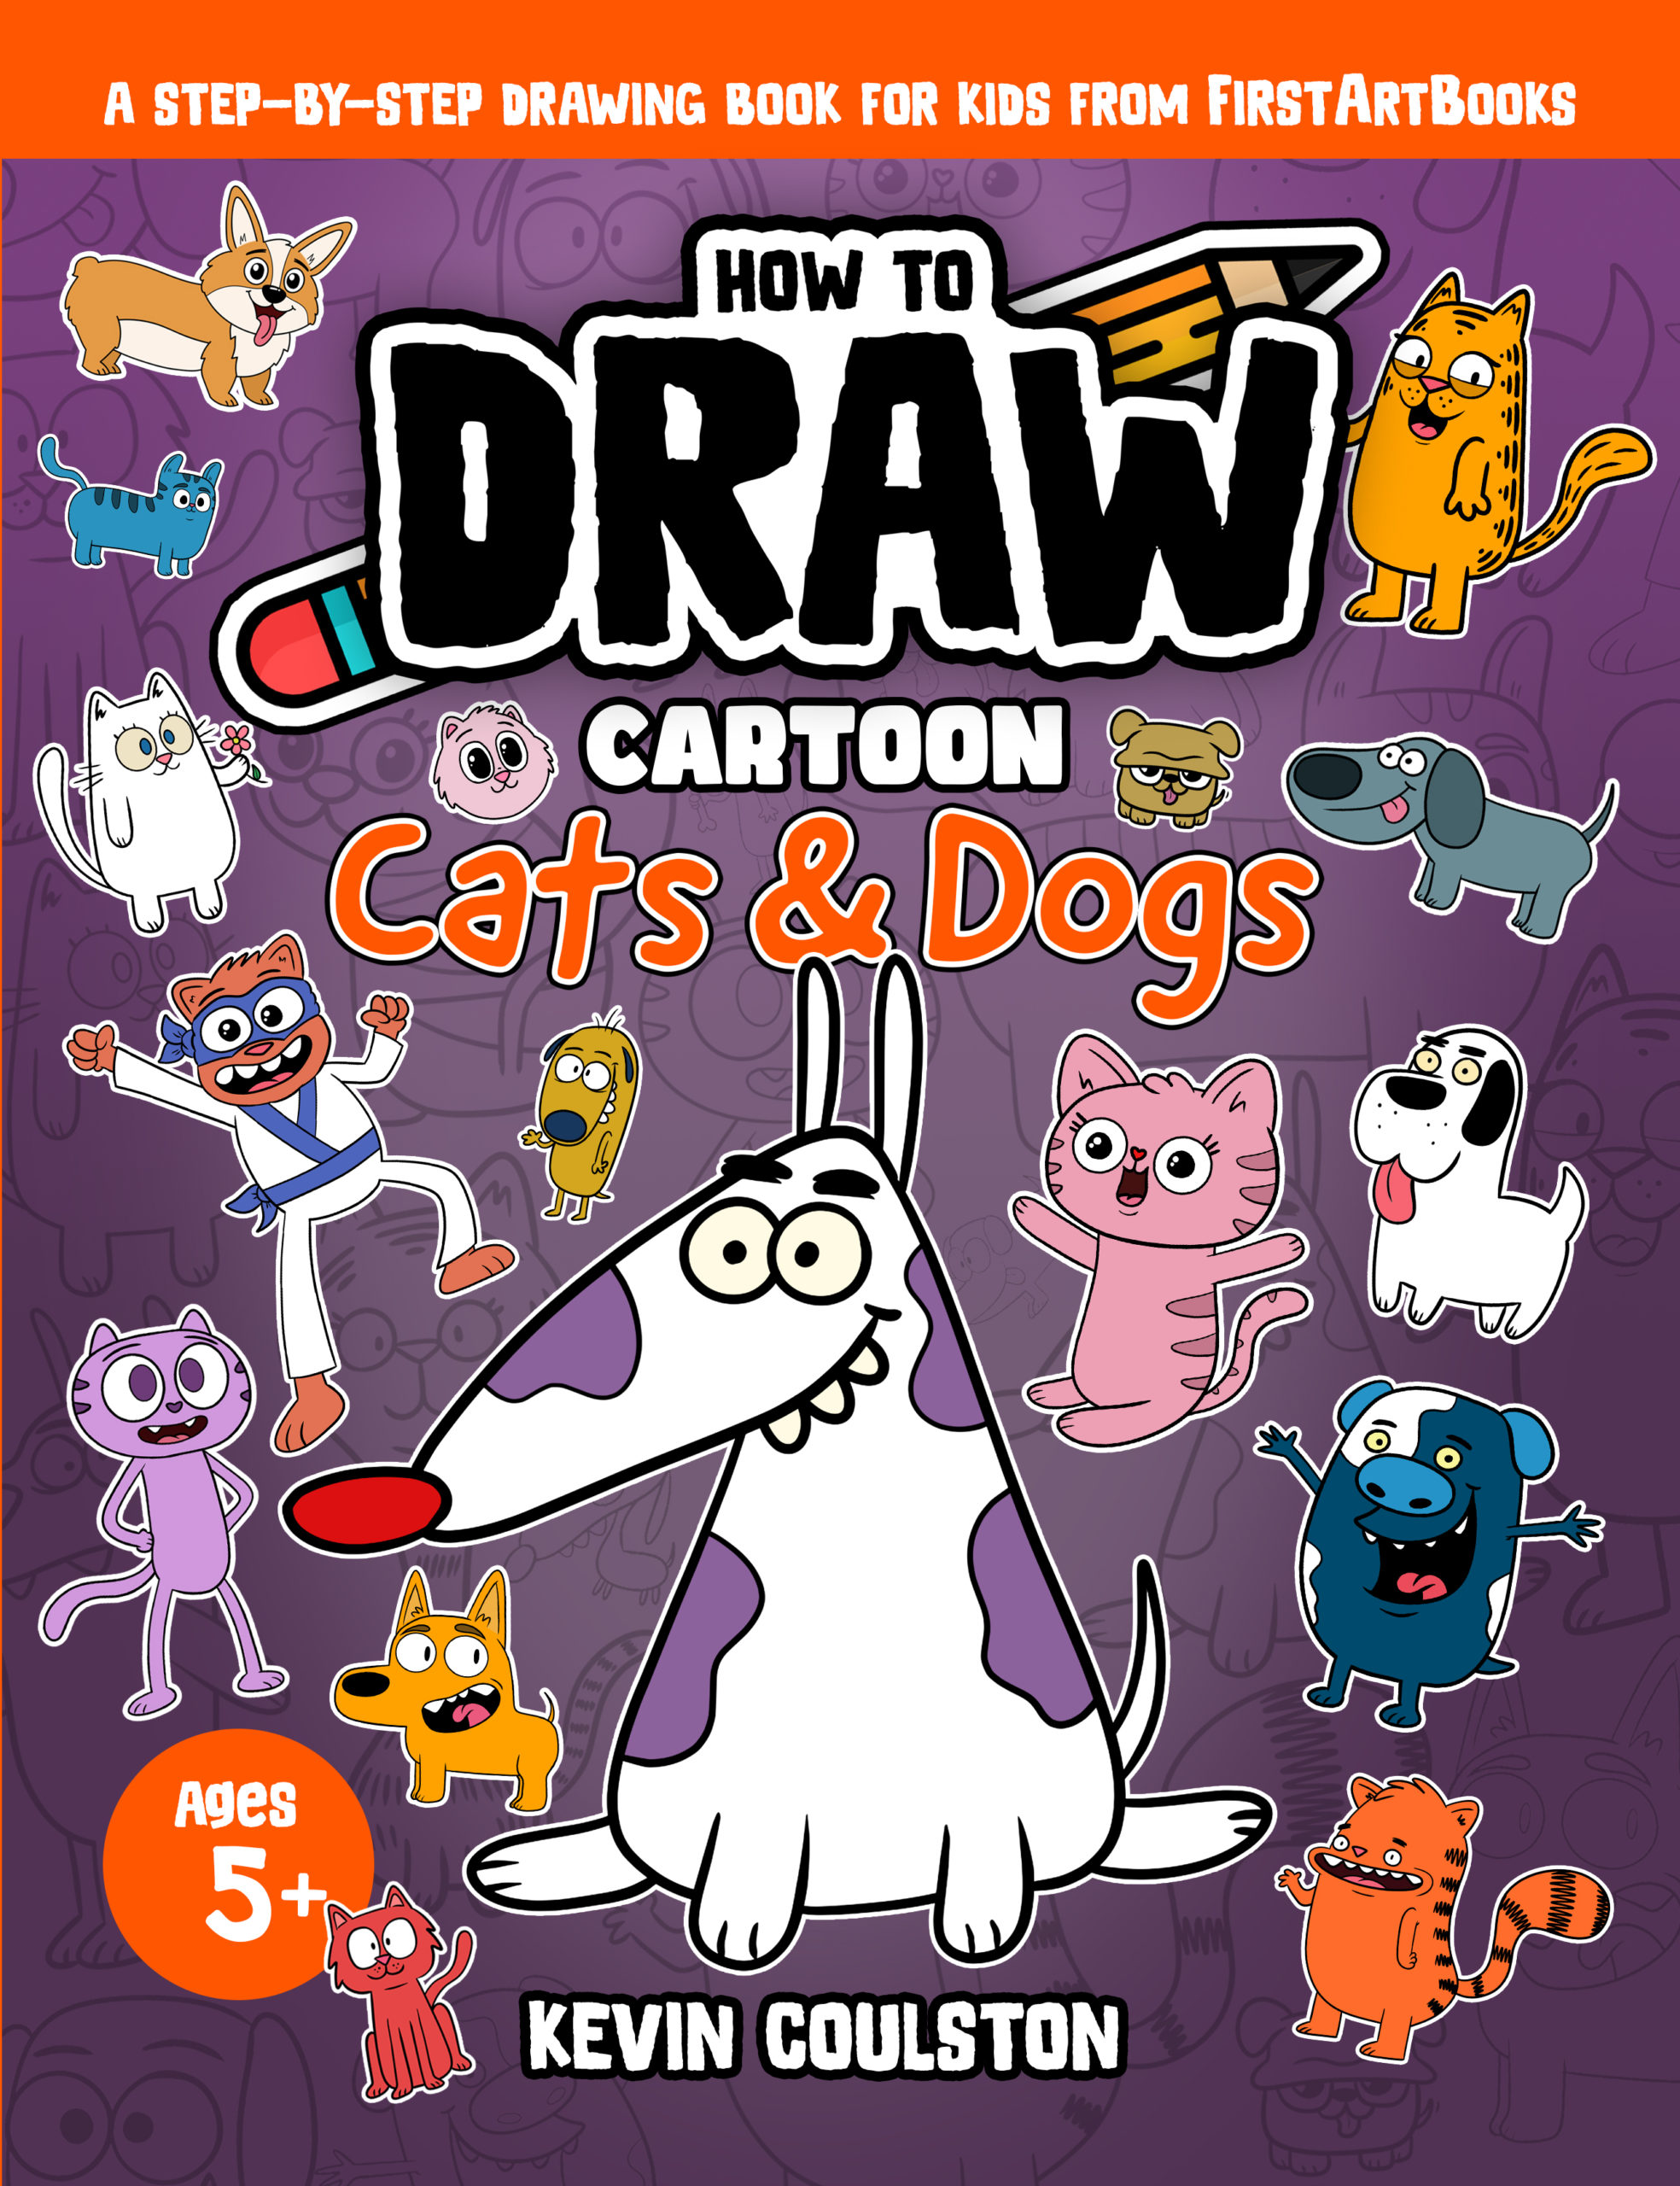 How to Draw: Cat & Dogs